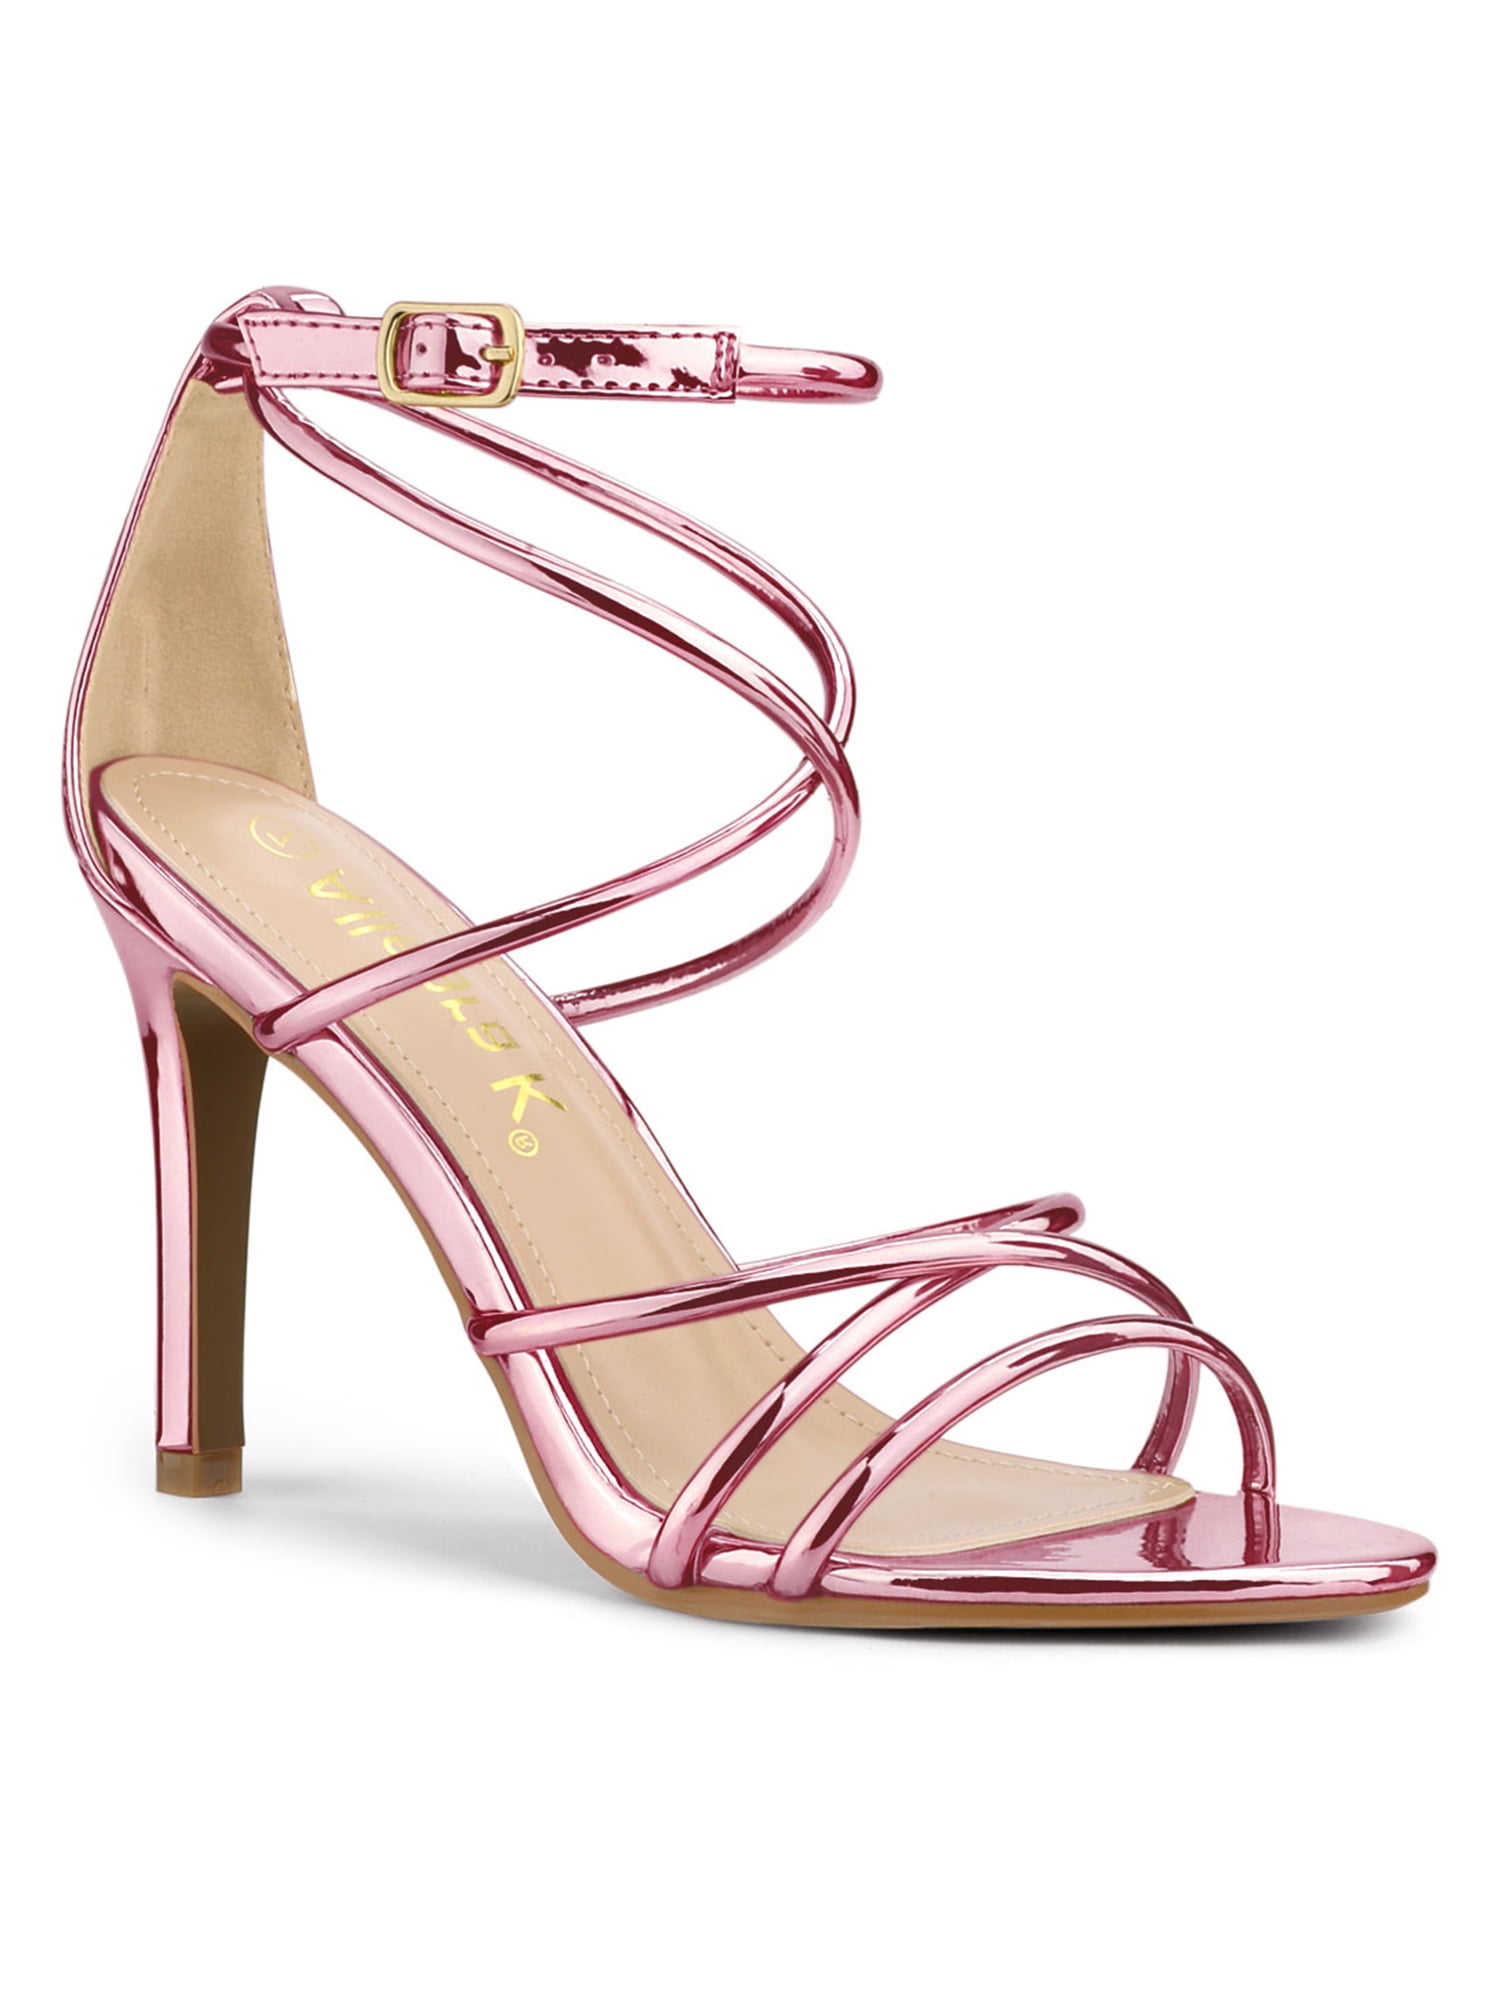 WOMENS PINK HIGH-HEEL PLATFORM STILETTO STRAPPY SANDALS PARTY SHOES SIZES 3-8 